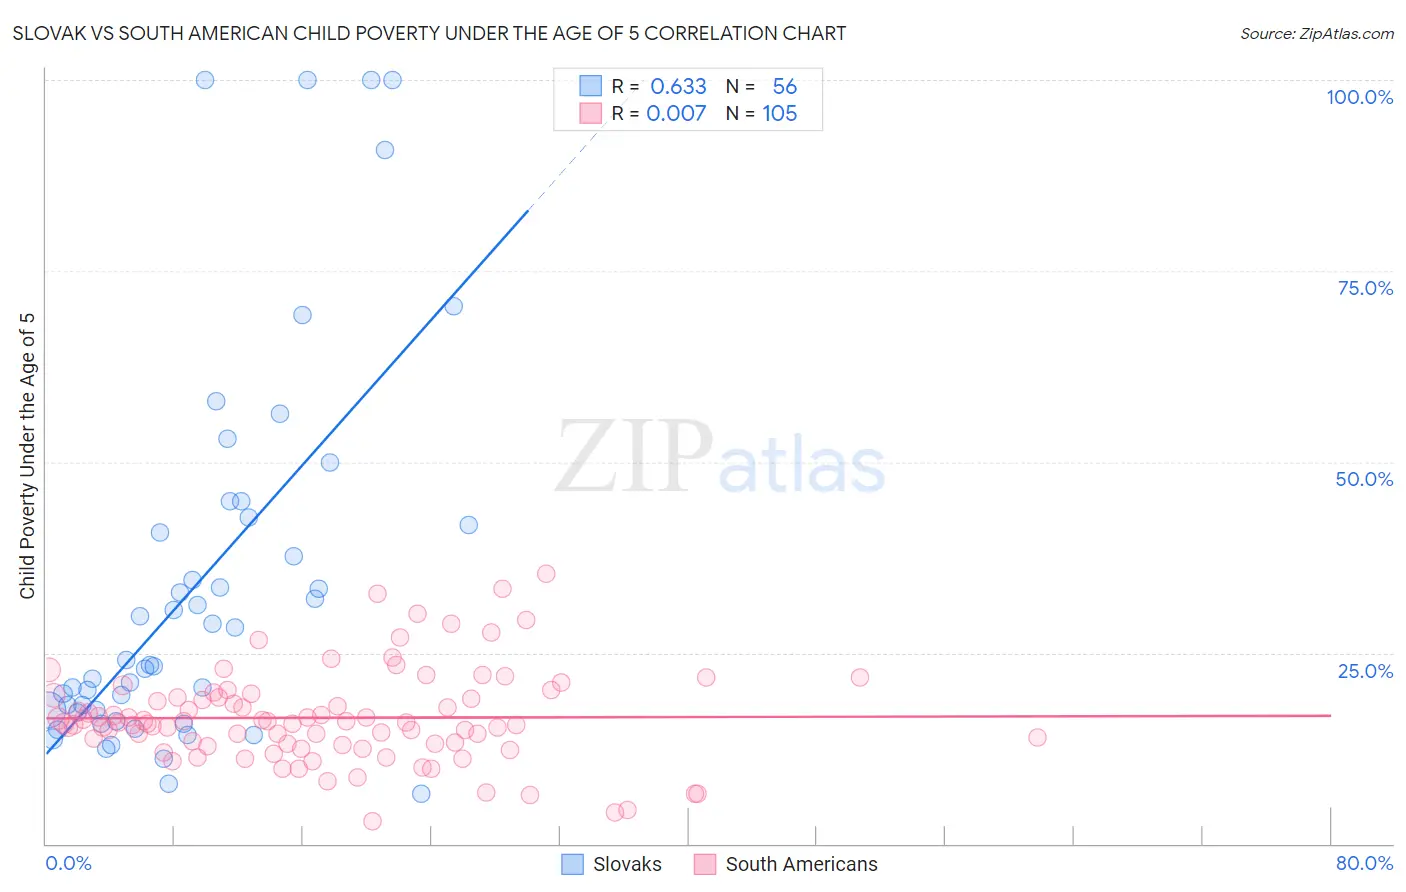 Slovak vs South American Child Poverty Under the Age of 5